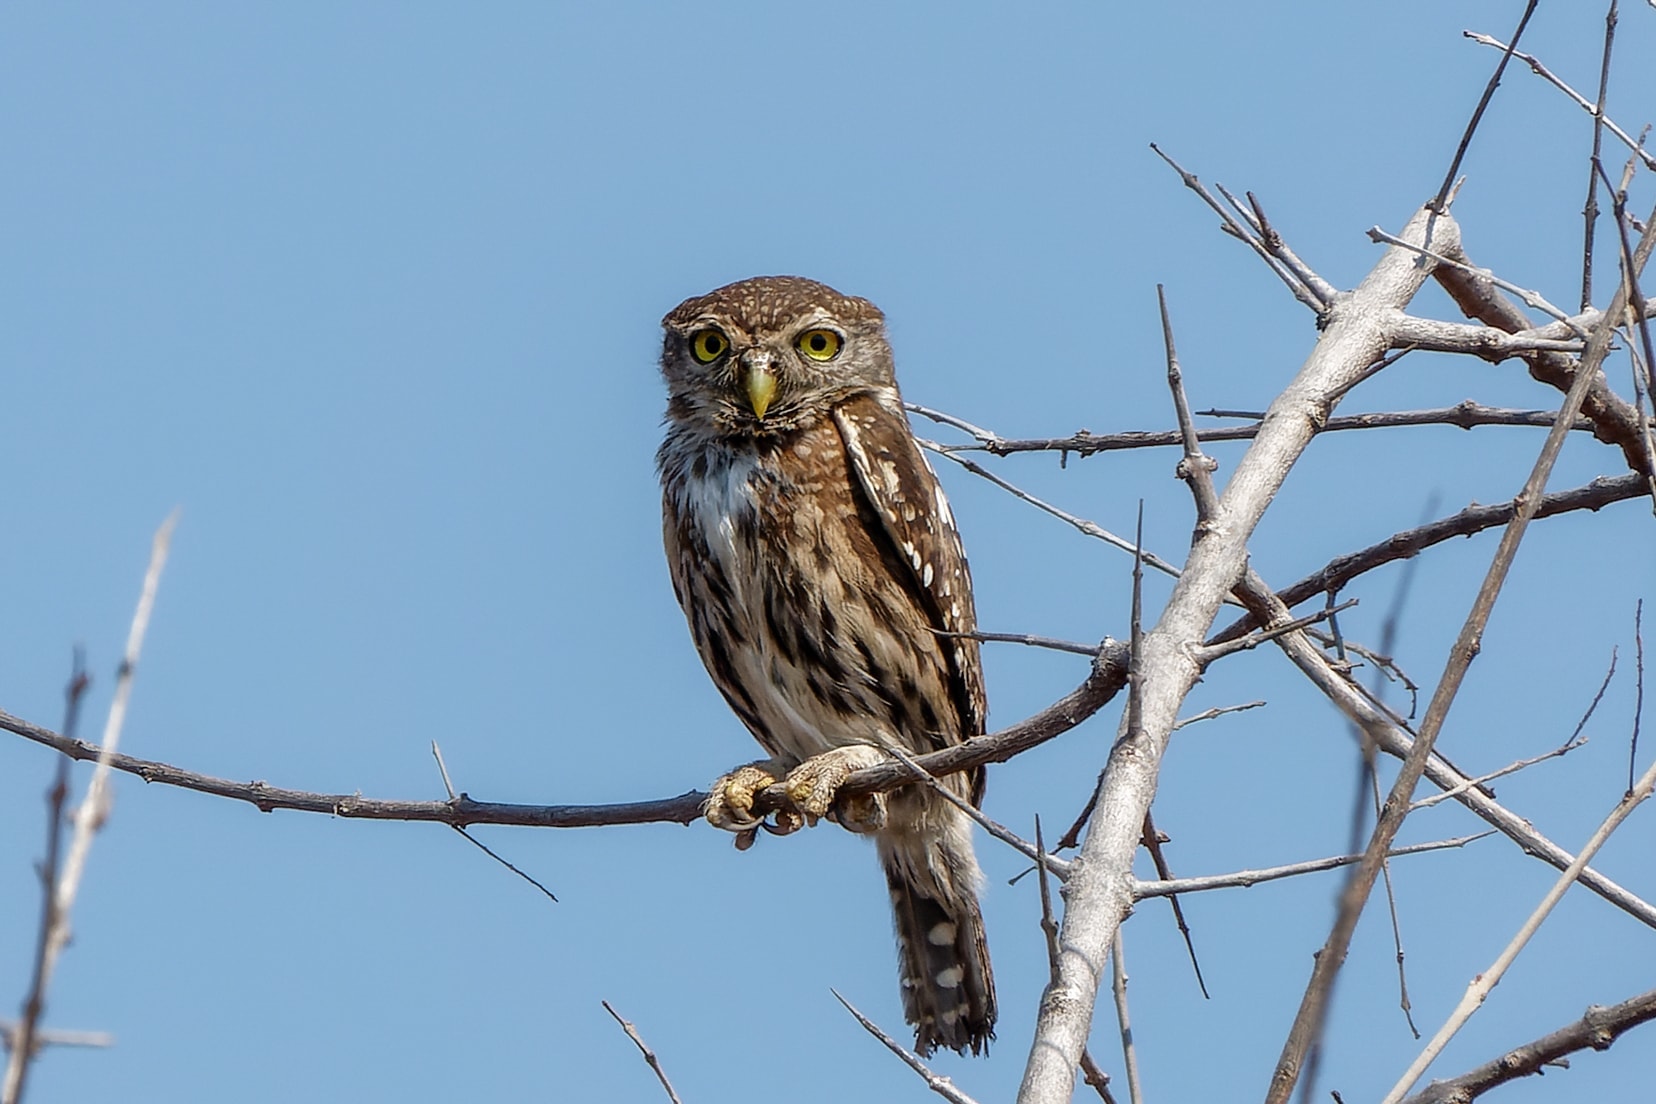 Pearl spotted owl on some branches at Klaserie Nature Reserve